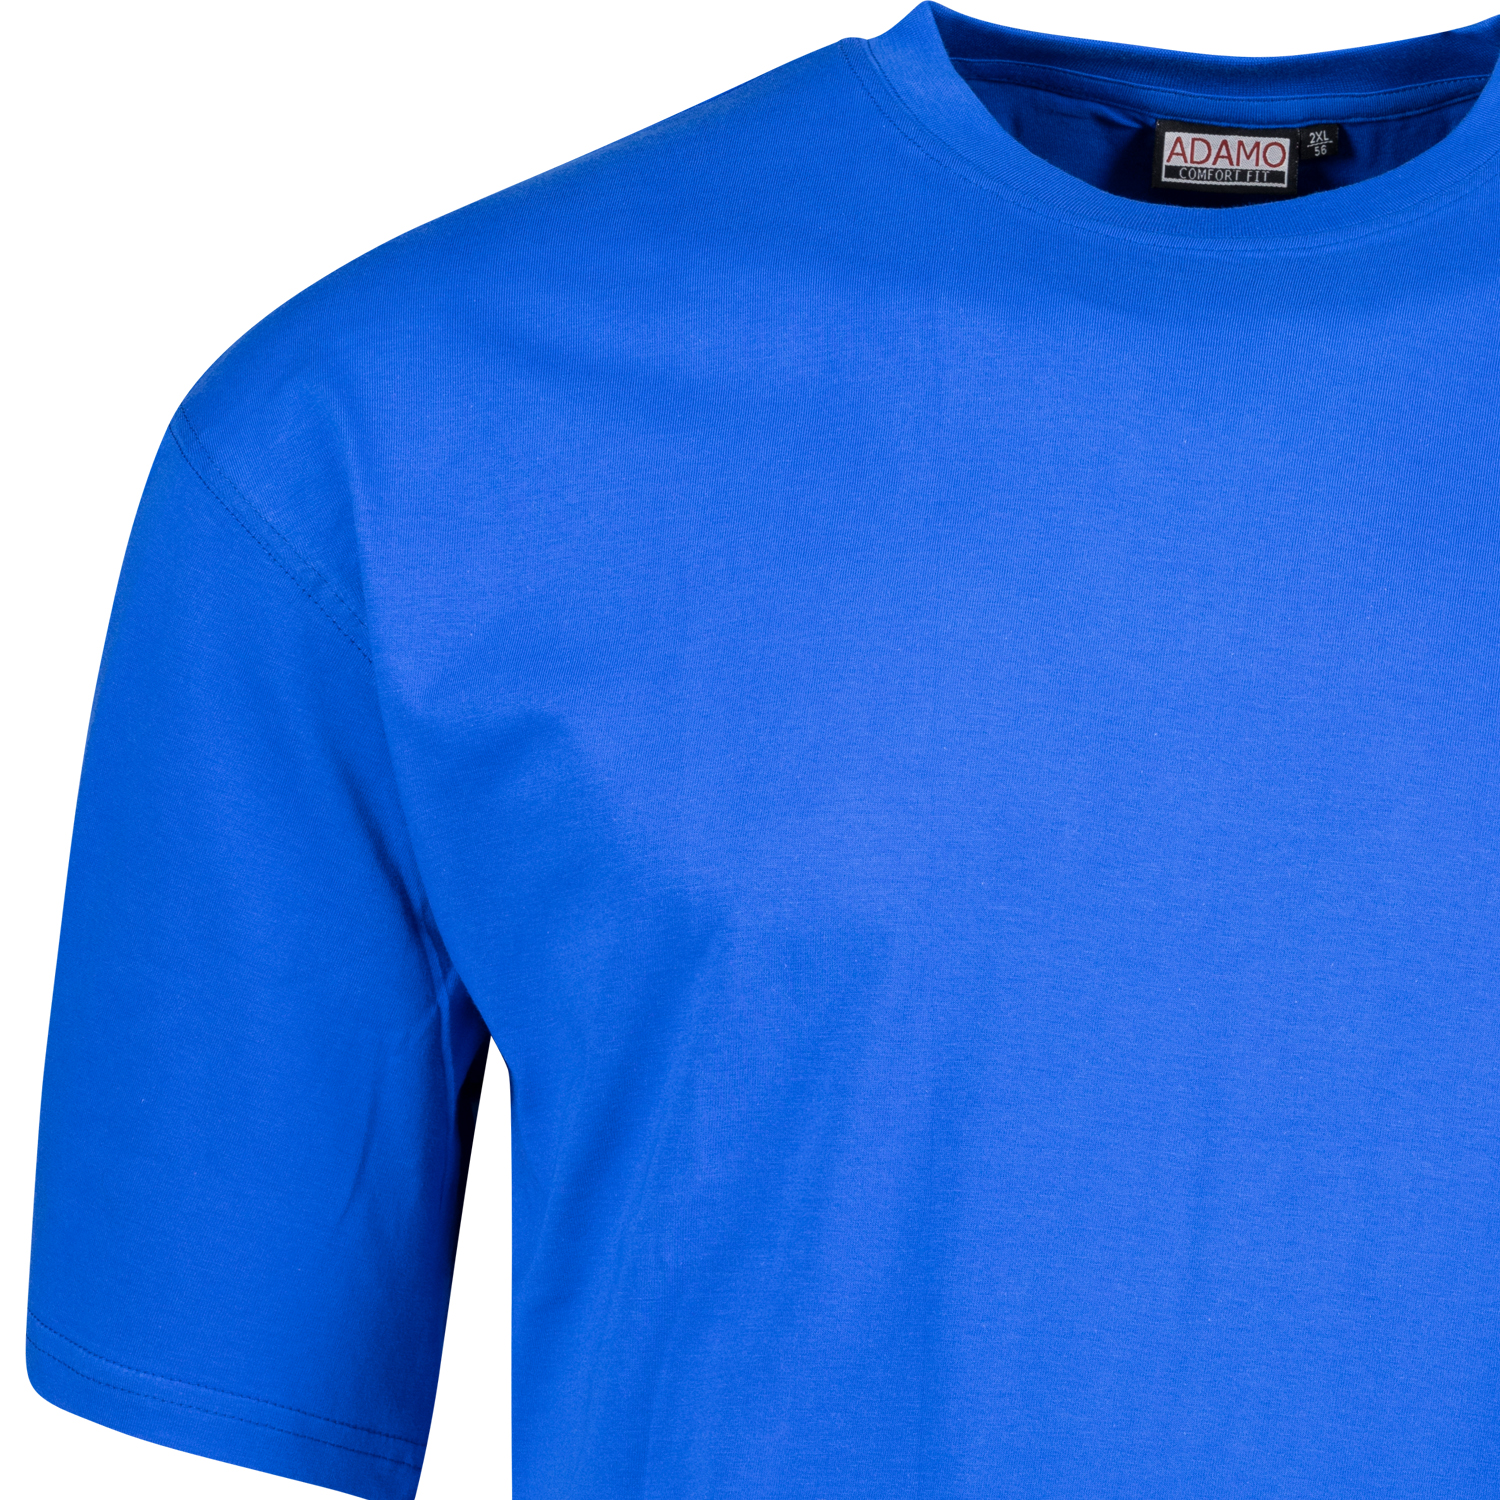 T-shirt in royal blue with round neck Tall Fit extra long series Magic by Adamo in long sizes up to 122